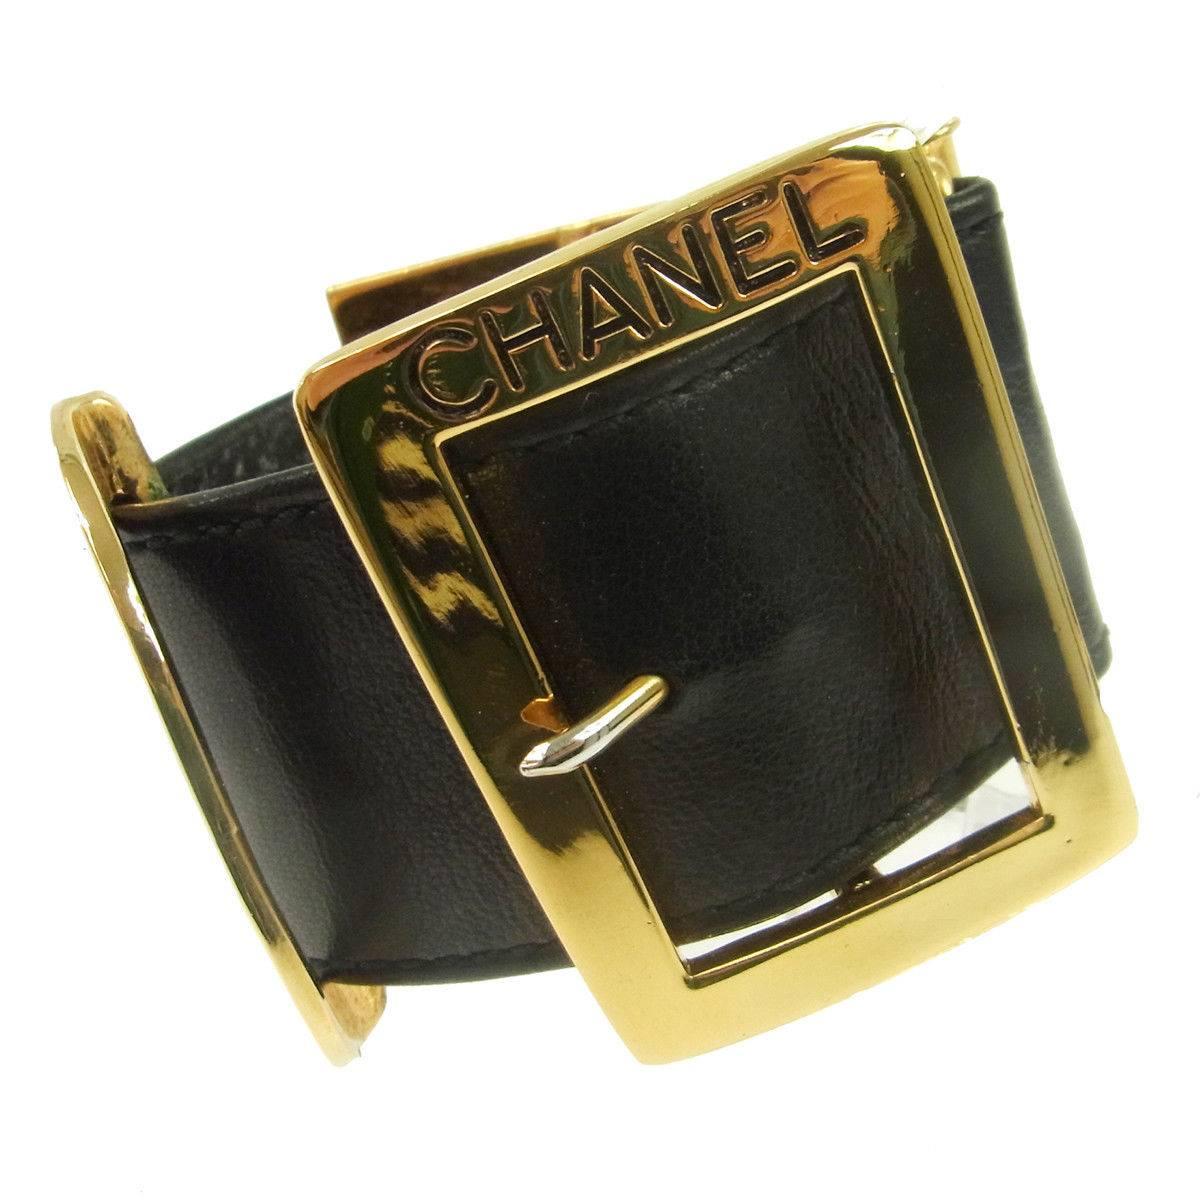 Chanel Black Leather Gold Buckle Evening Charm Cuff Bracelet in Box